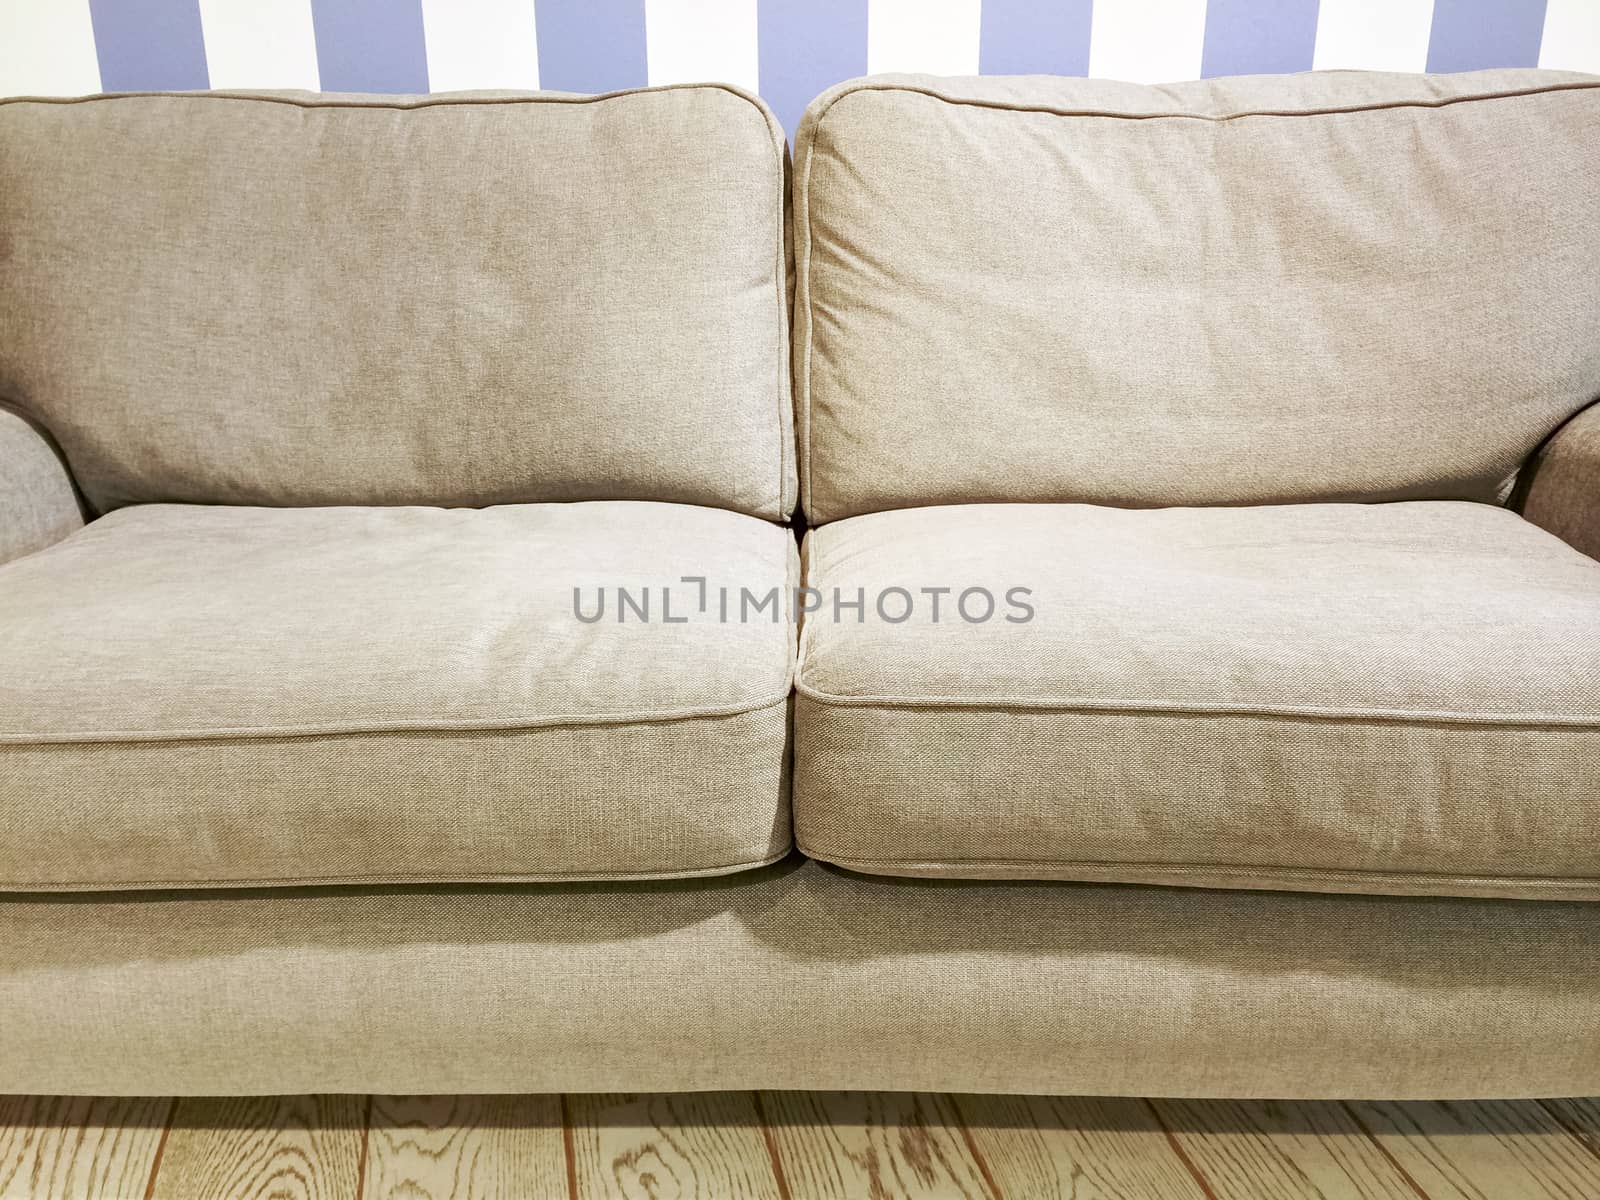 Beige sofa near the wall with striped wallpaper by anikasalsera